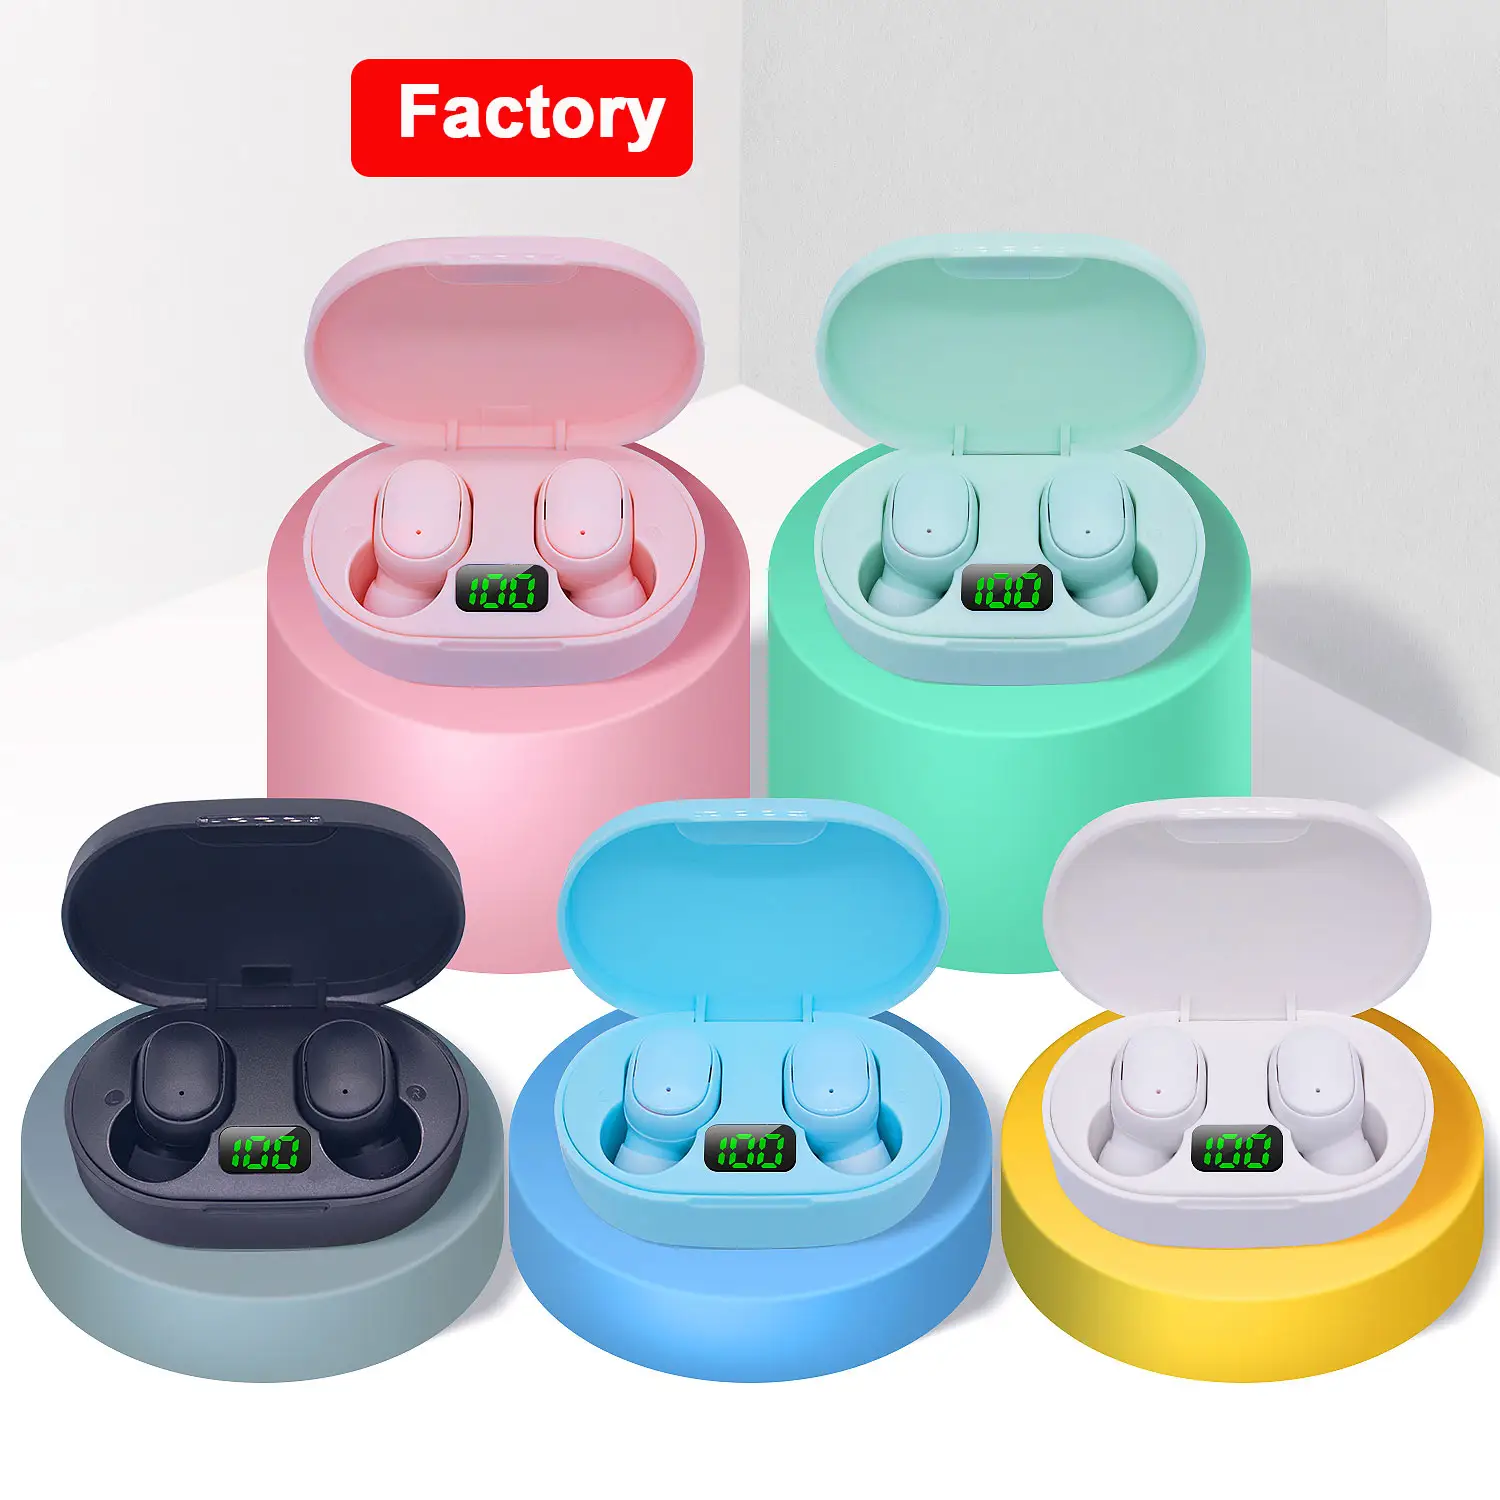 New Micro Earbuds Gaming Headset ear buds Noise Cancelling Rechargeable Headphone Wireless Earphones